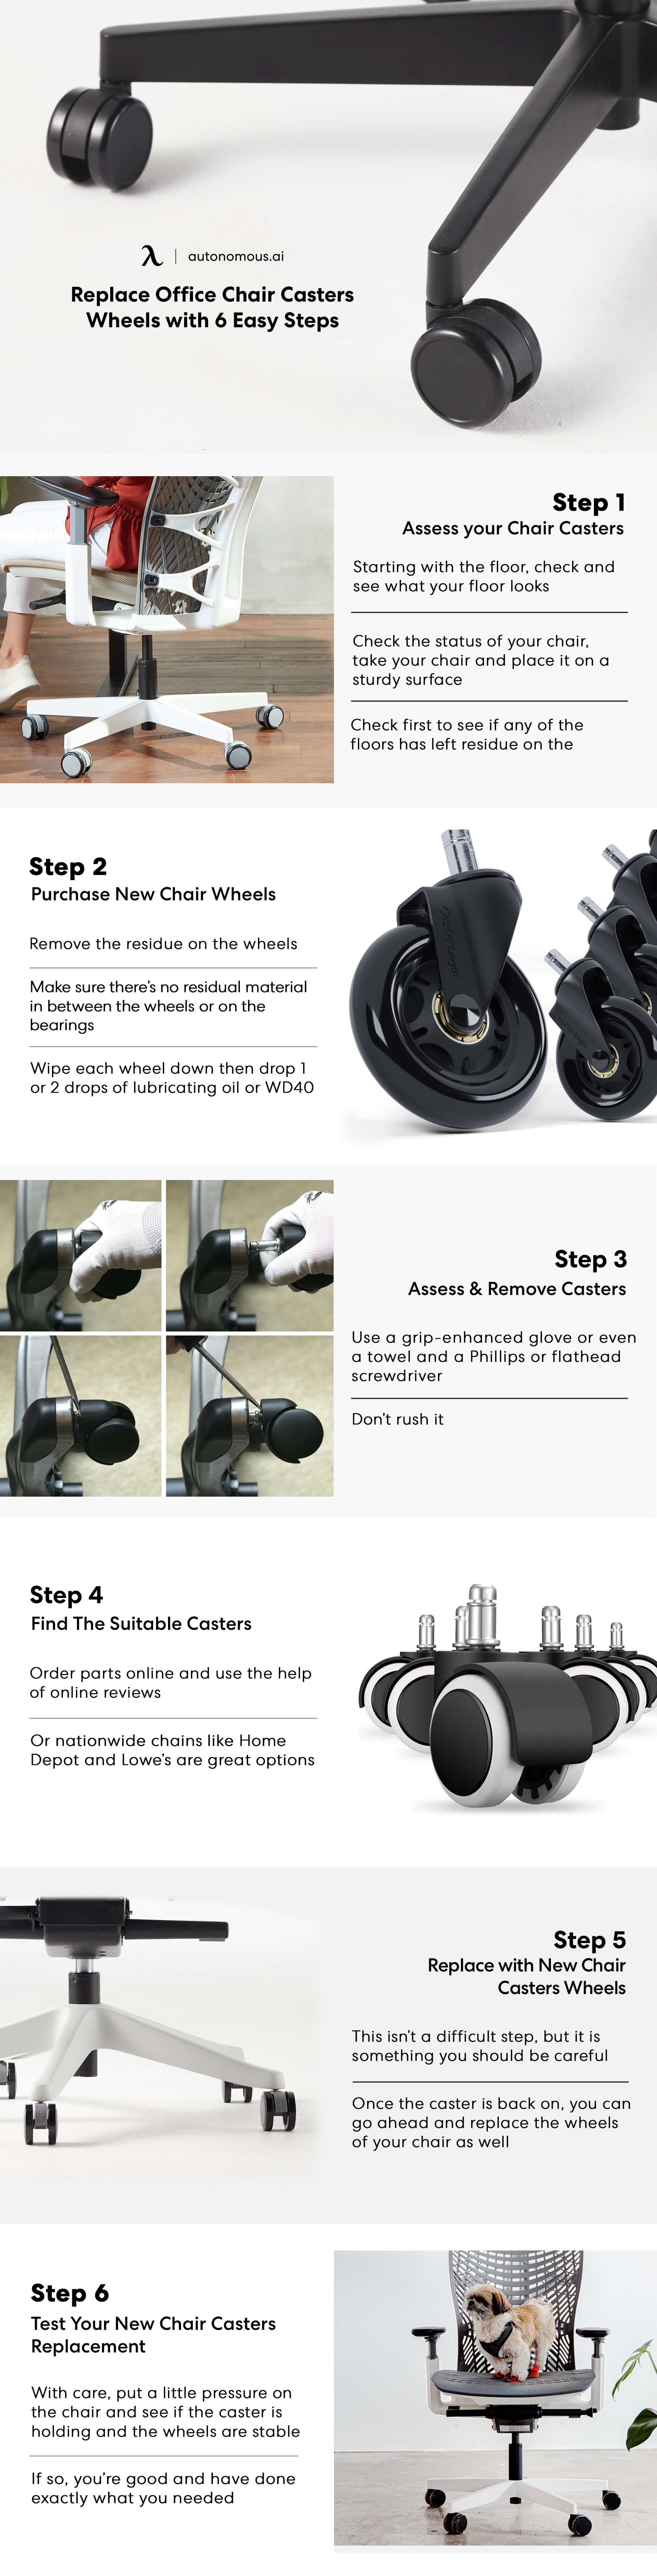 Replace Office Chair Casters Wheels, How To Replace Office Chair Casters